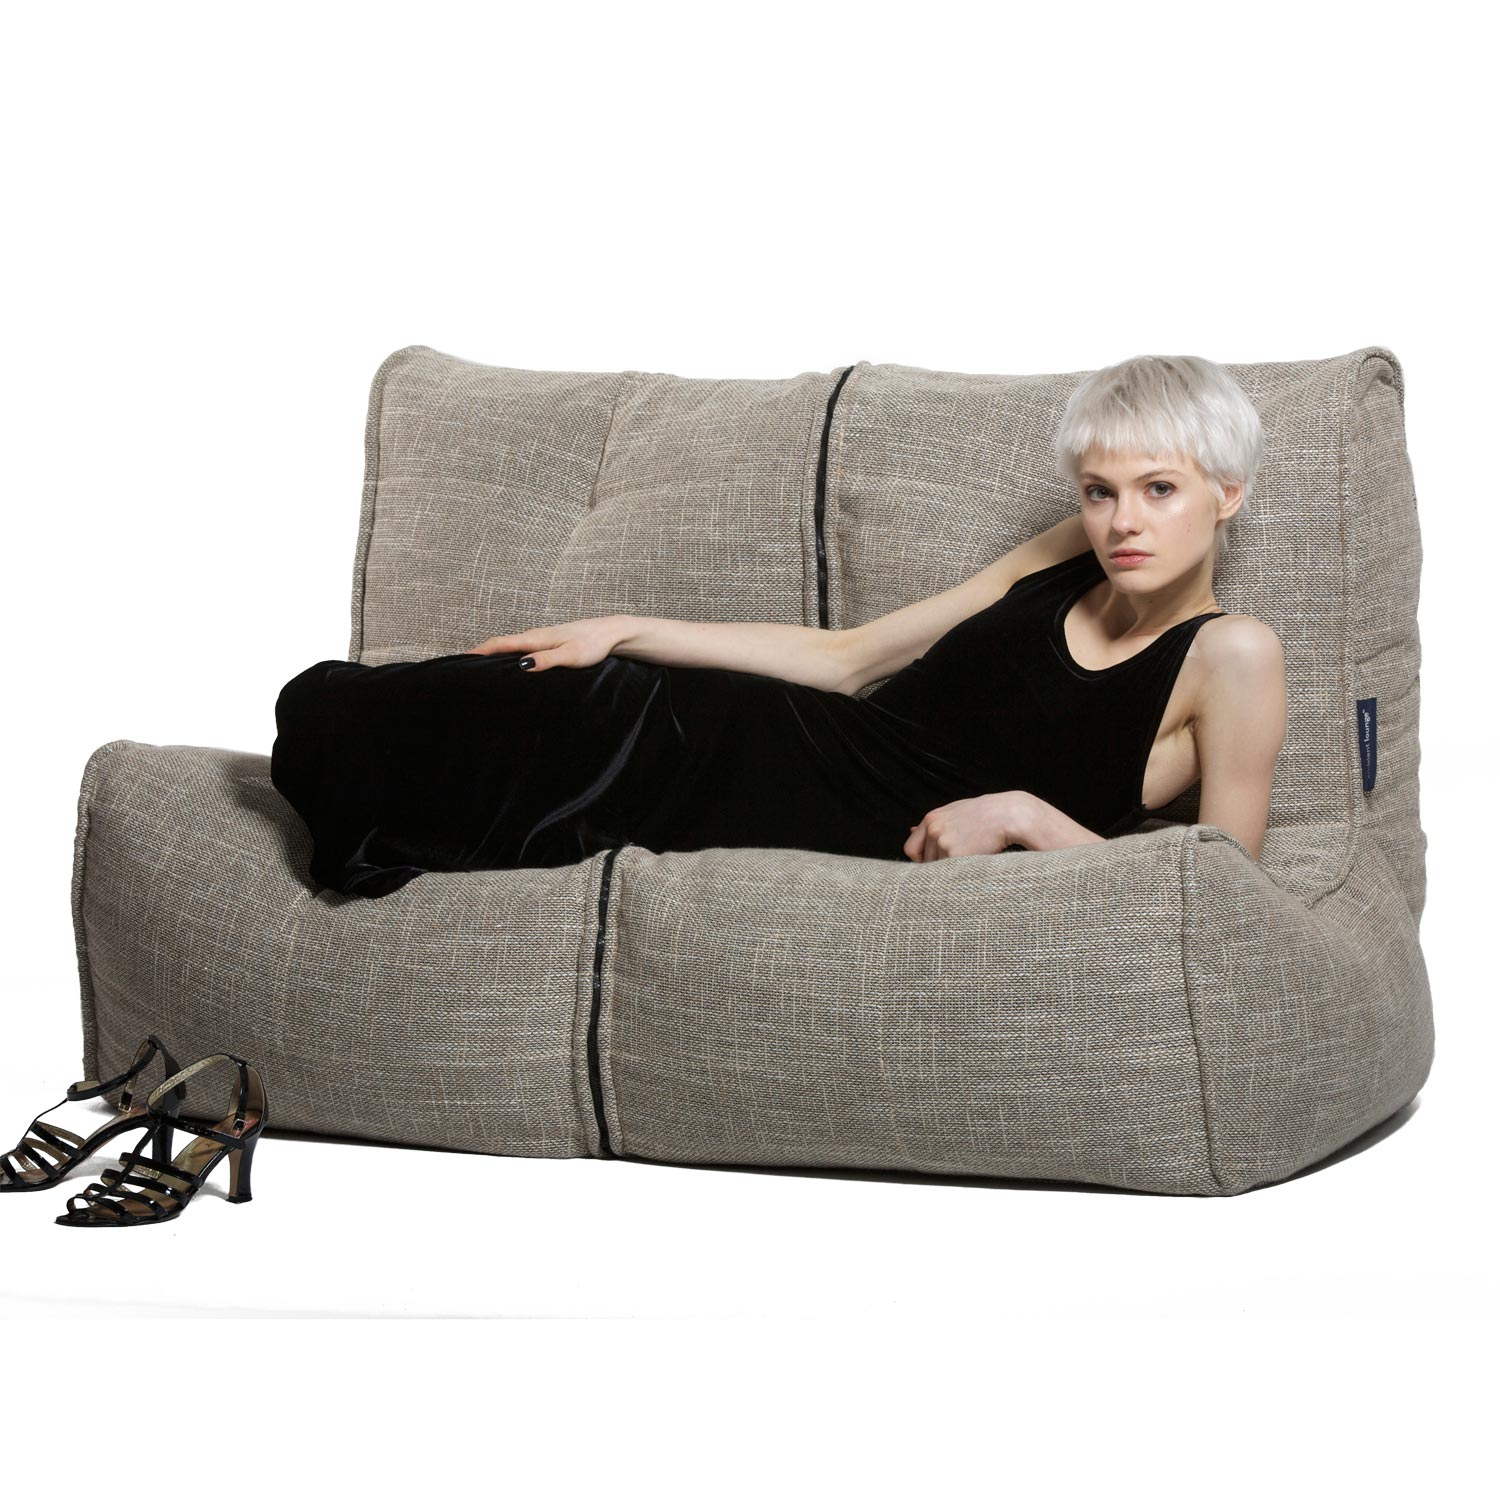 Creatice Bean Bag Sofa Bed for Large Space